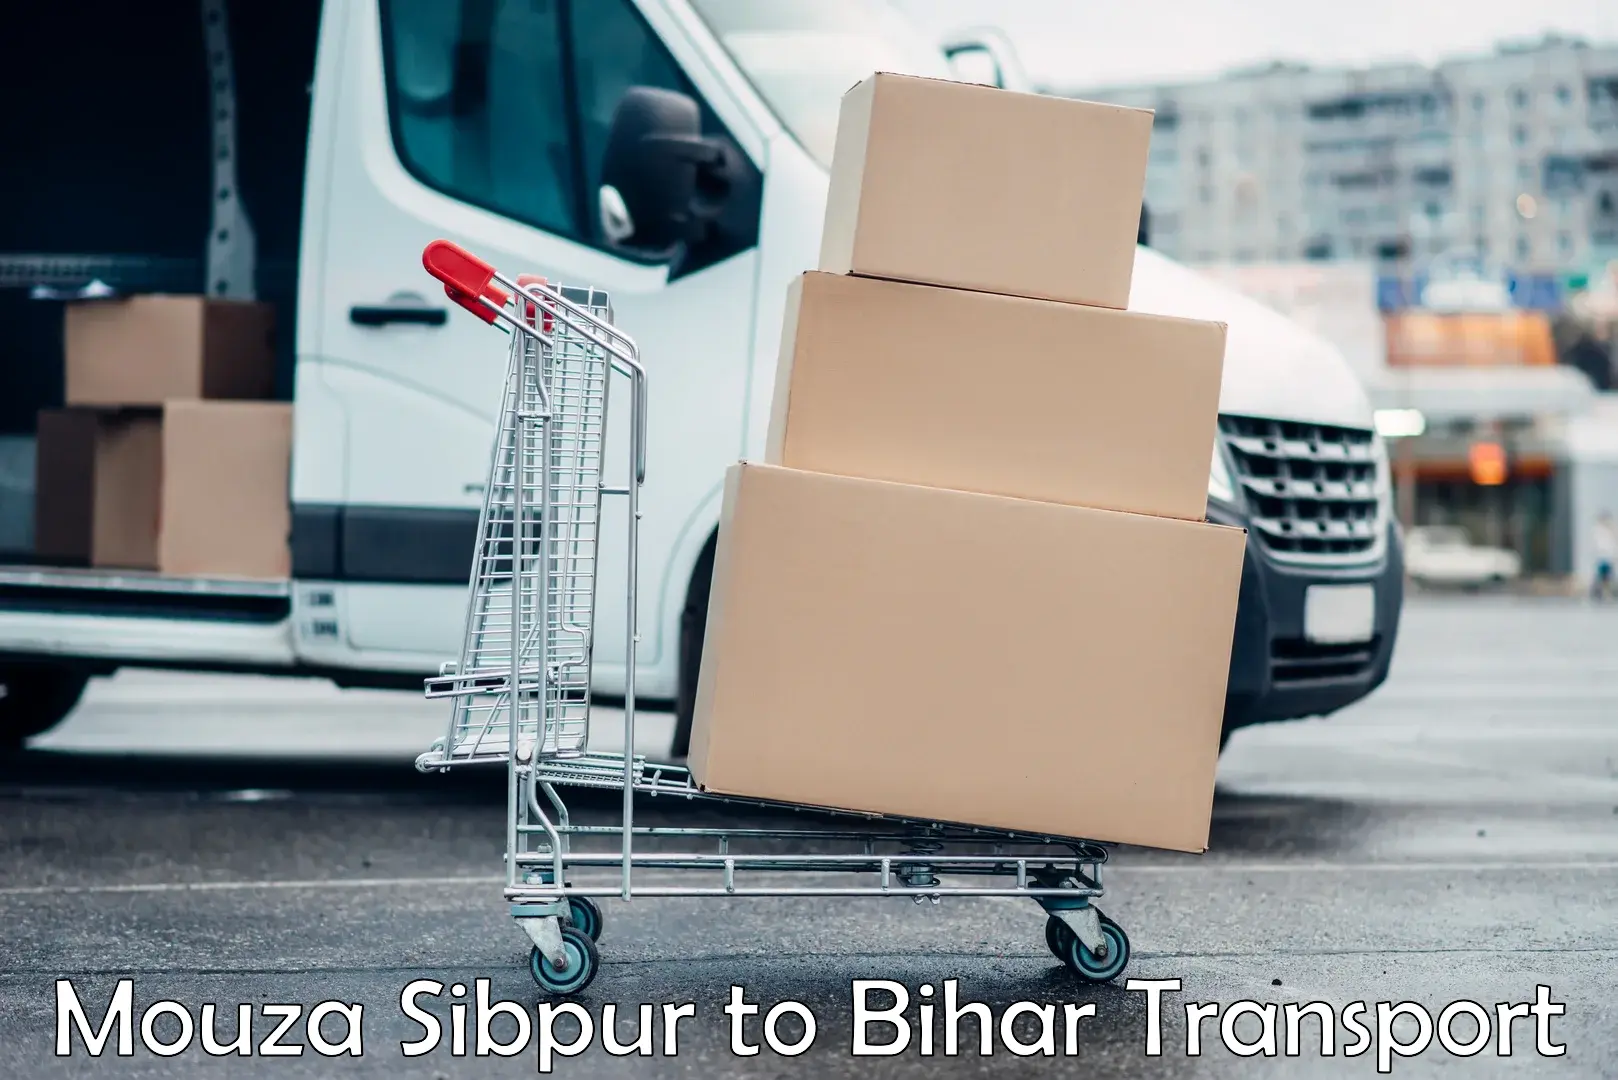 Air freight transport services Mouza Sibpur to Sandesh